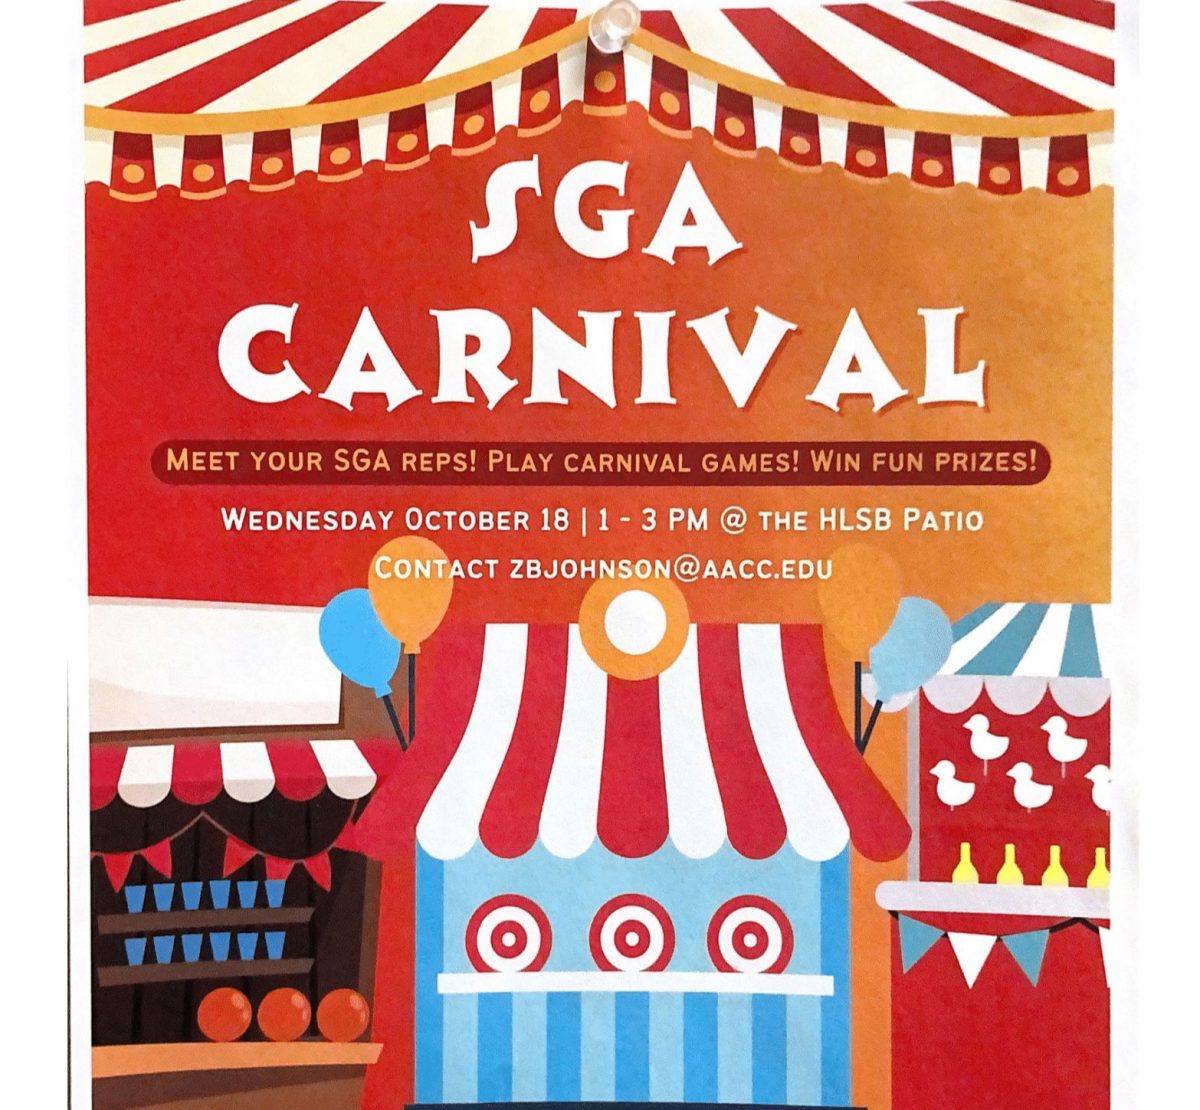 The+Student+Government+Association+will+host+a+carnival+on+Oct.+18%2C+along+with+other+events+like+a+Day+of+the+Dead+celebration+and+a+winter+festival.+Image+courtesy+of+the+SGA